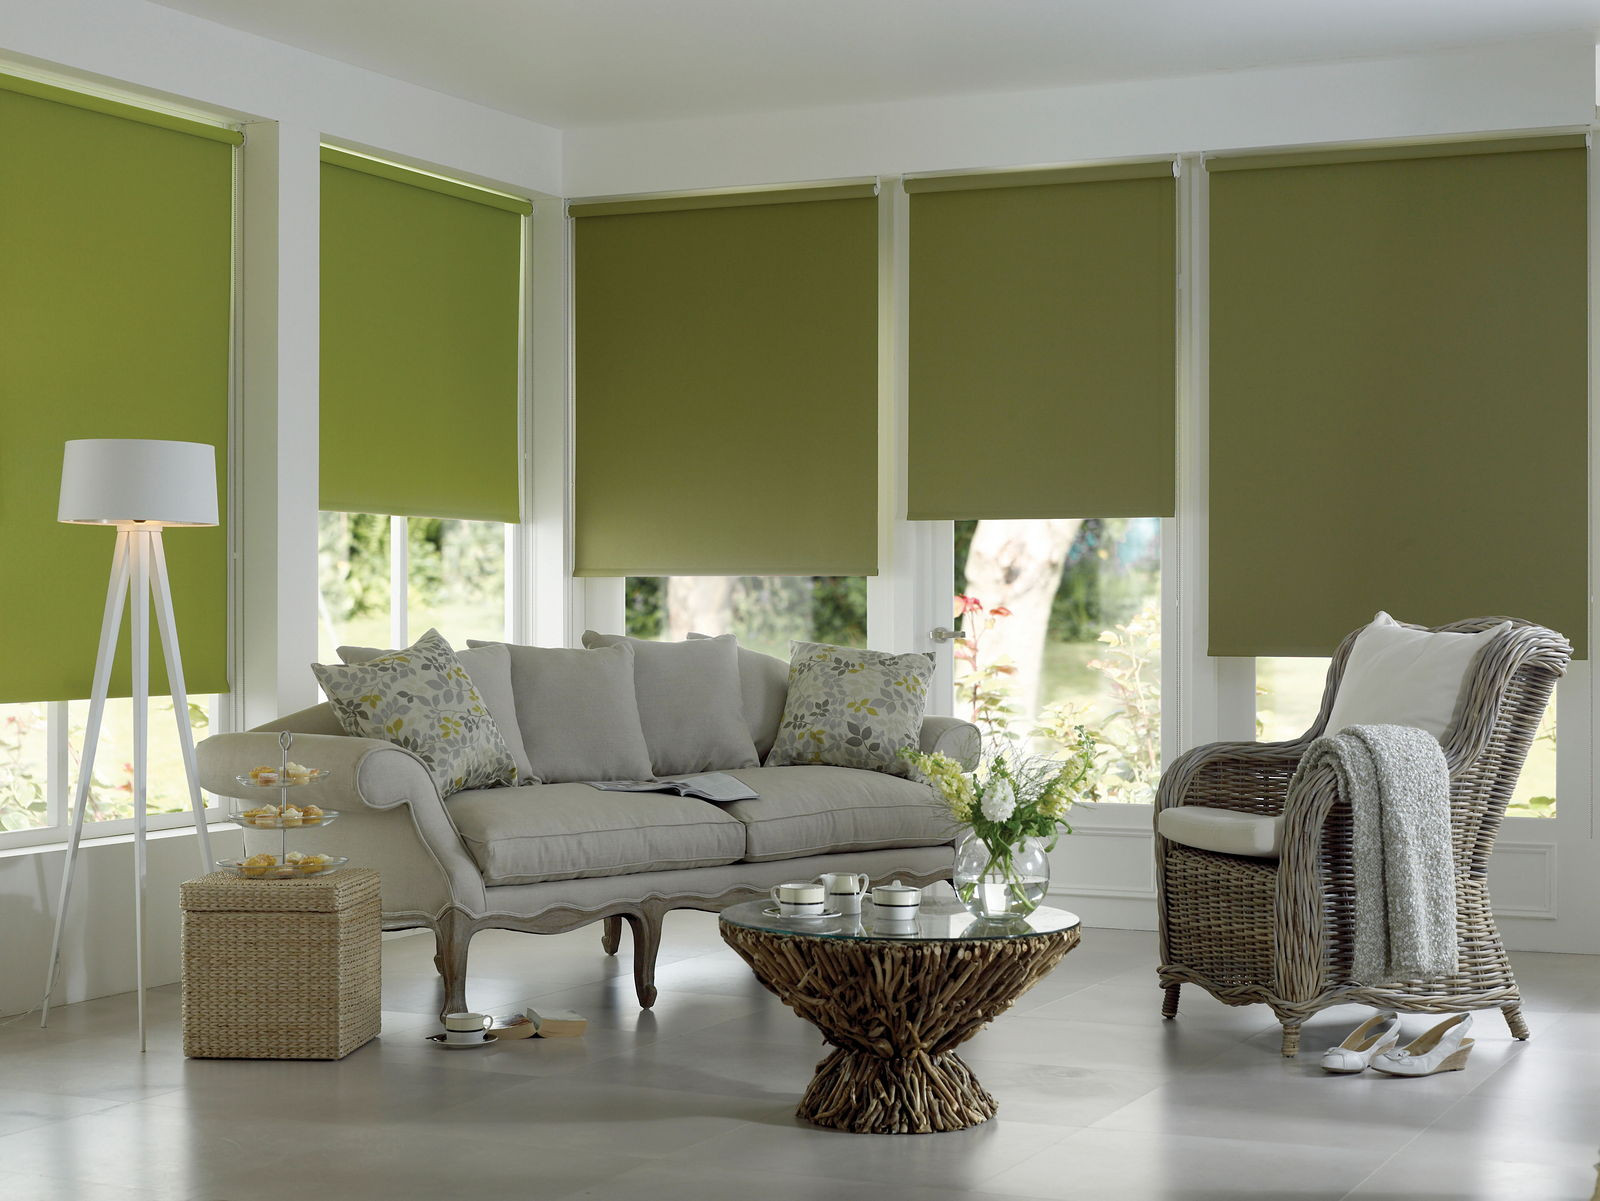 Curtain Valances For Living Room
 Living Room Curtains the best photos of curtains design